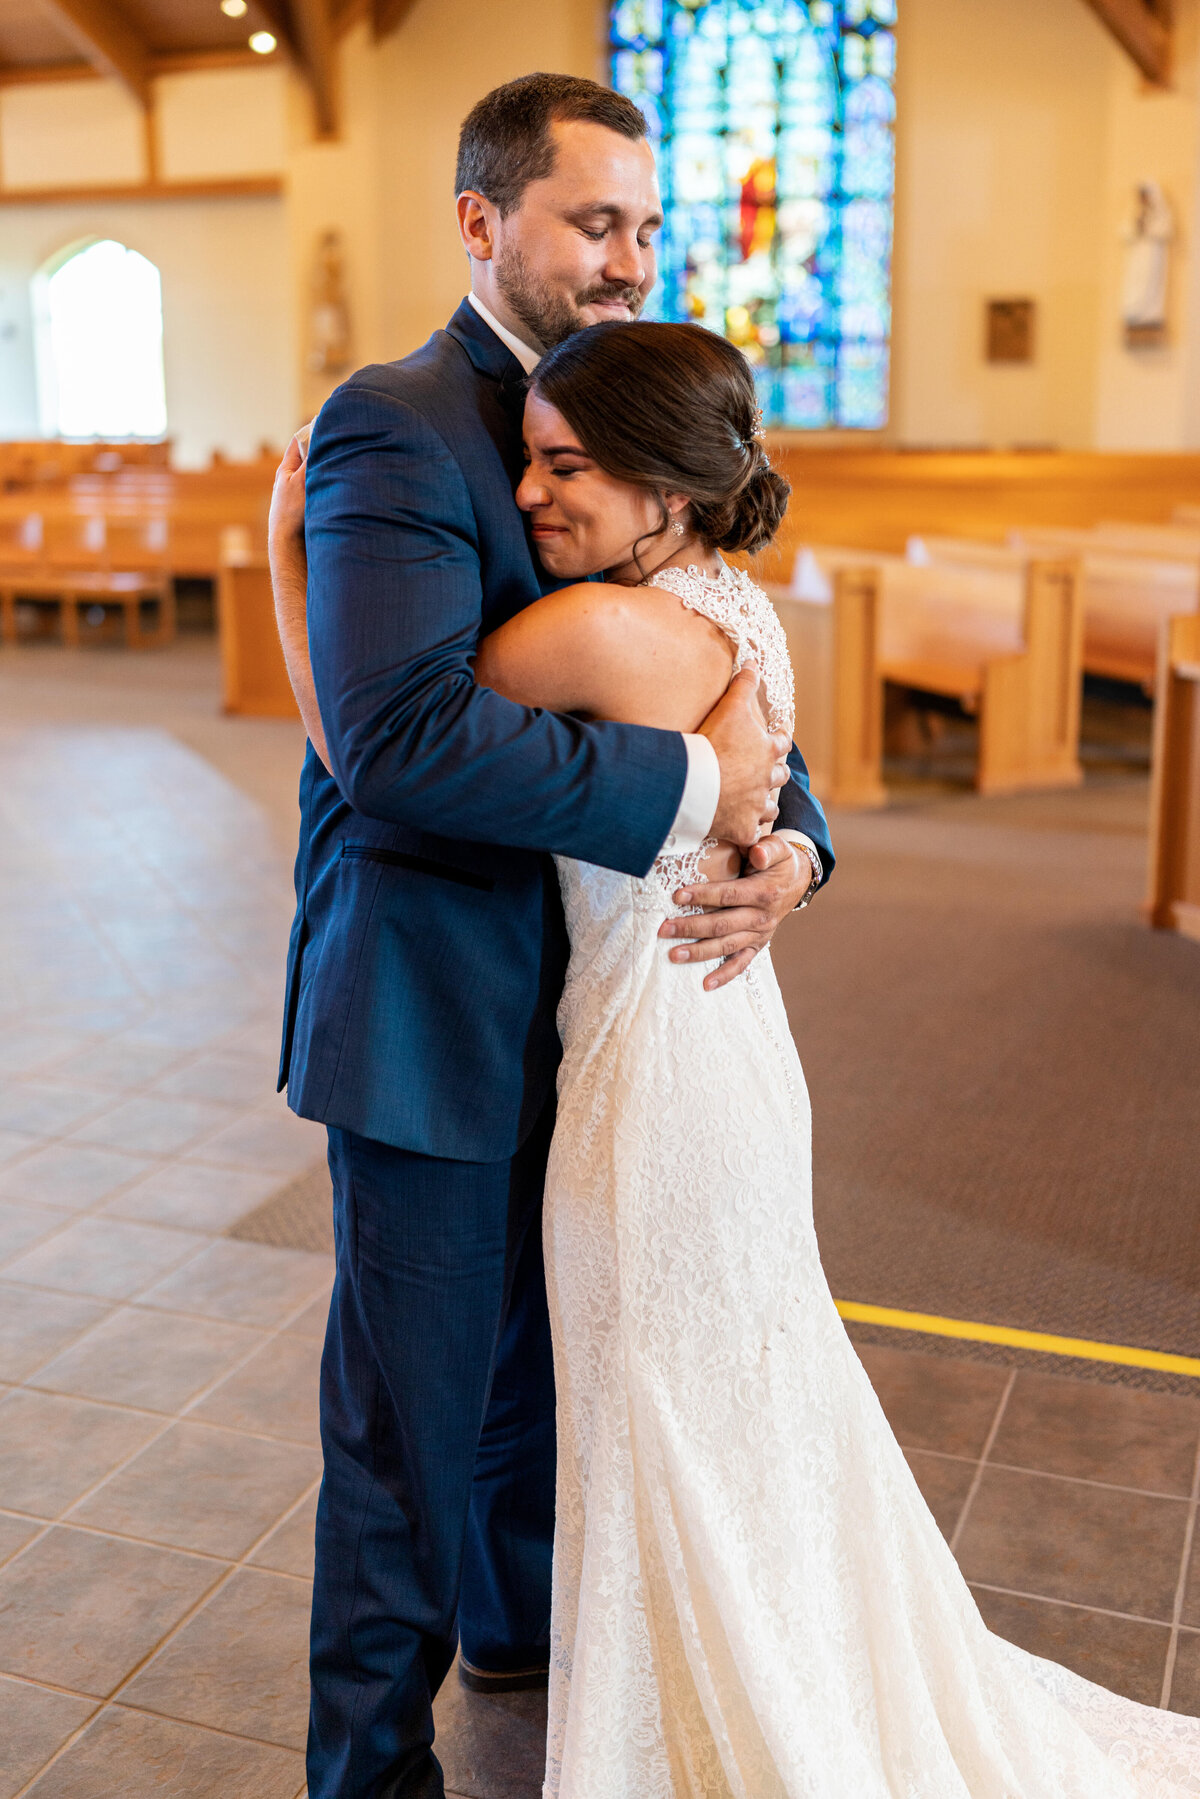 Bride and groom hug after first look in church.